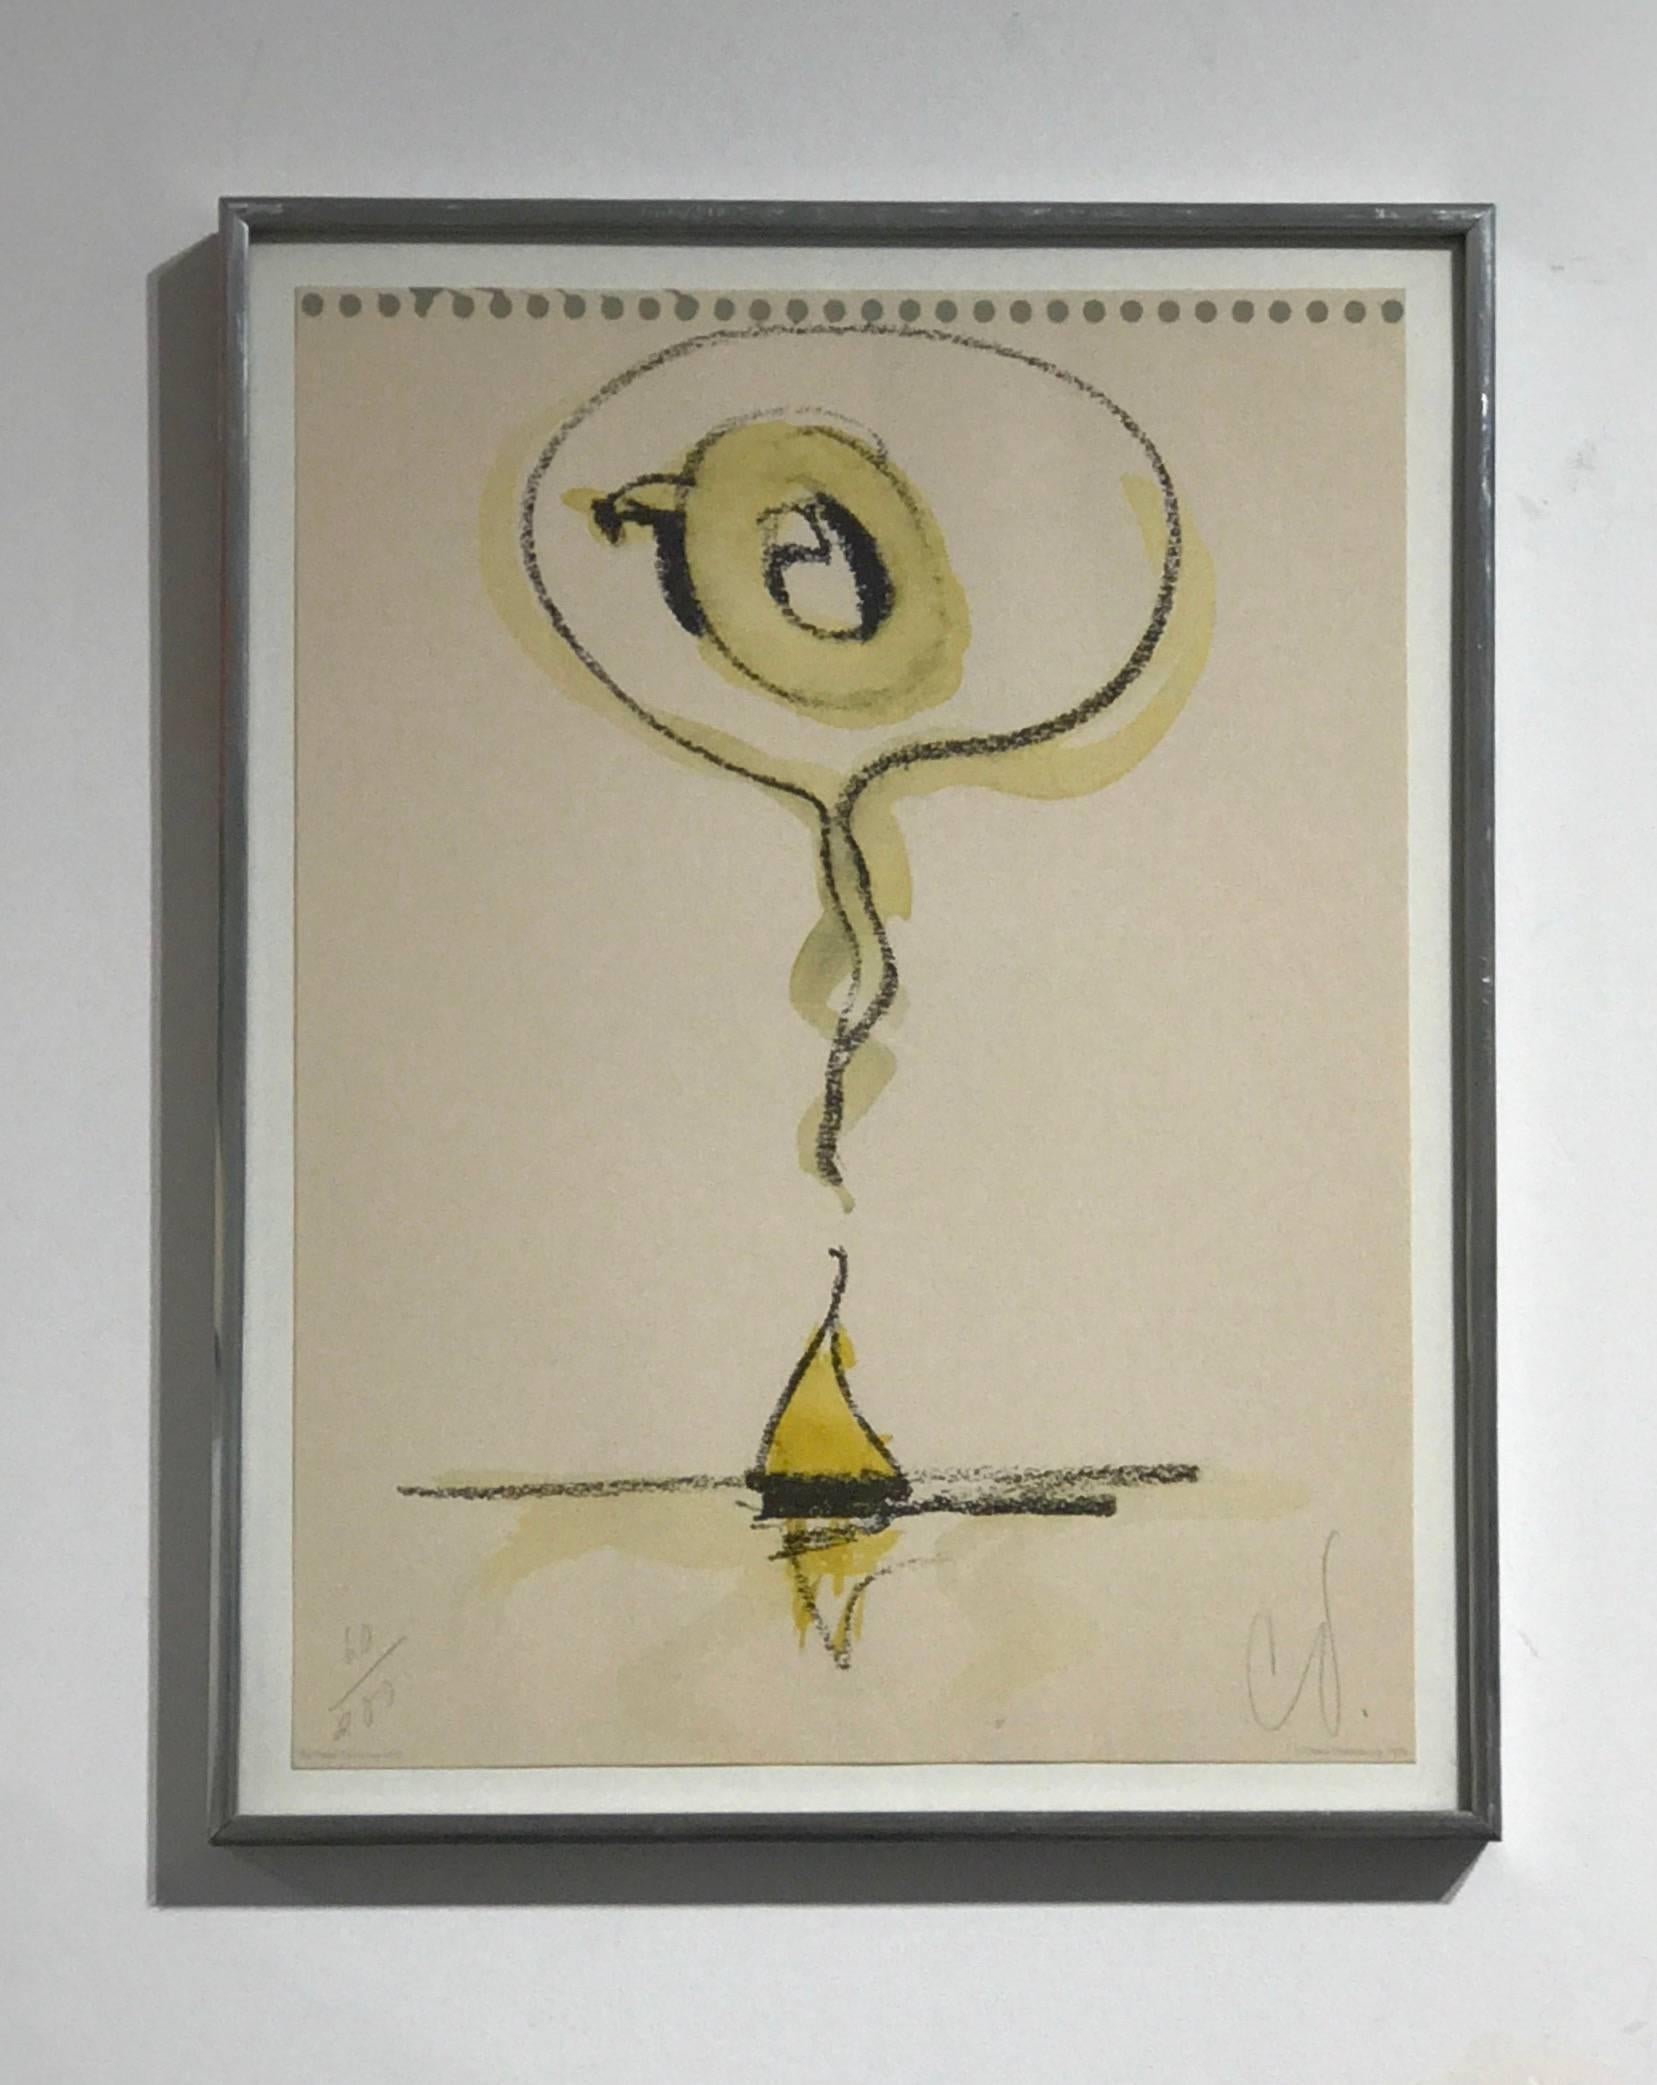 Sailboat Thinking of Q - Print by Claes Oldenburg